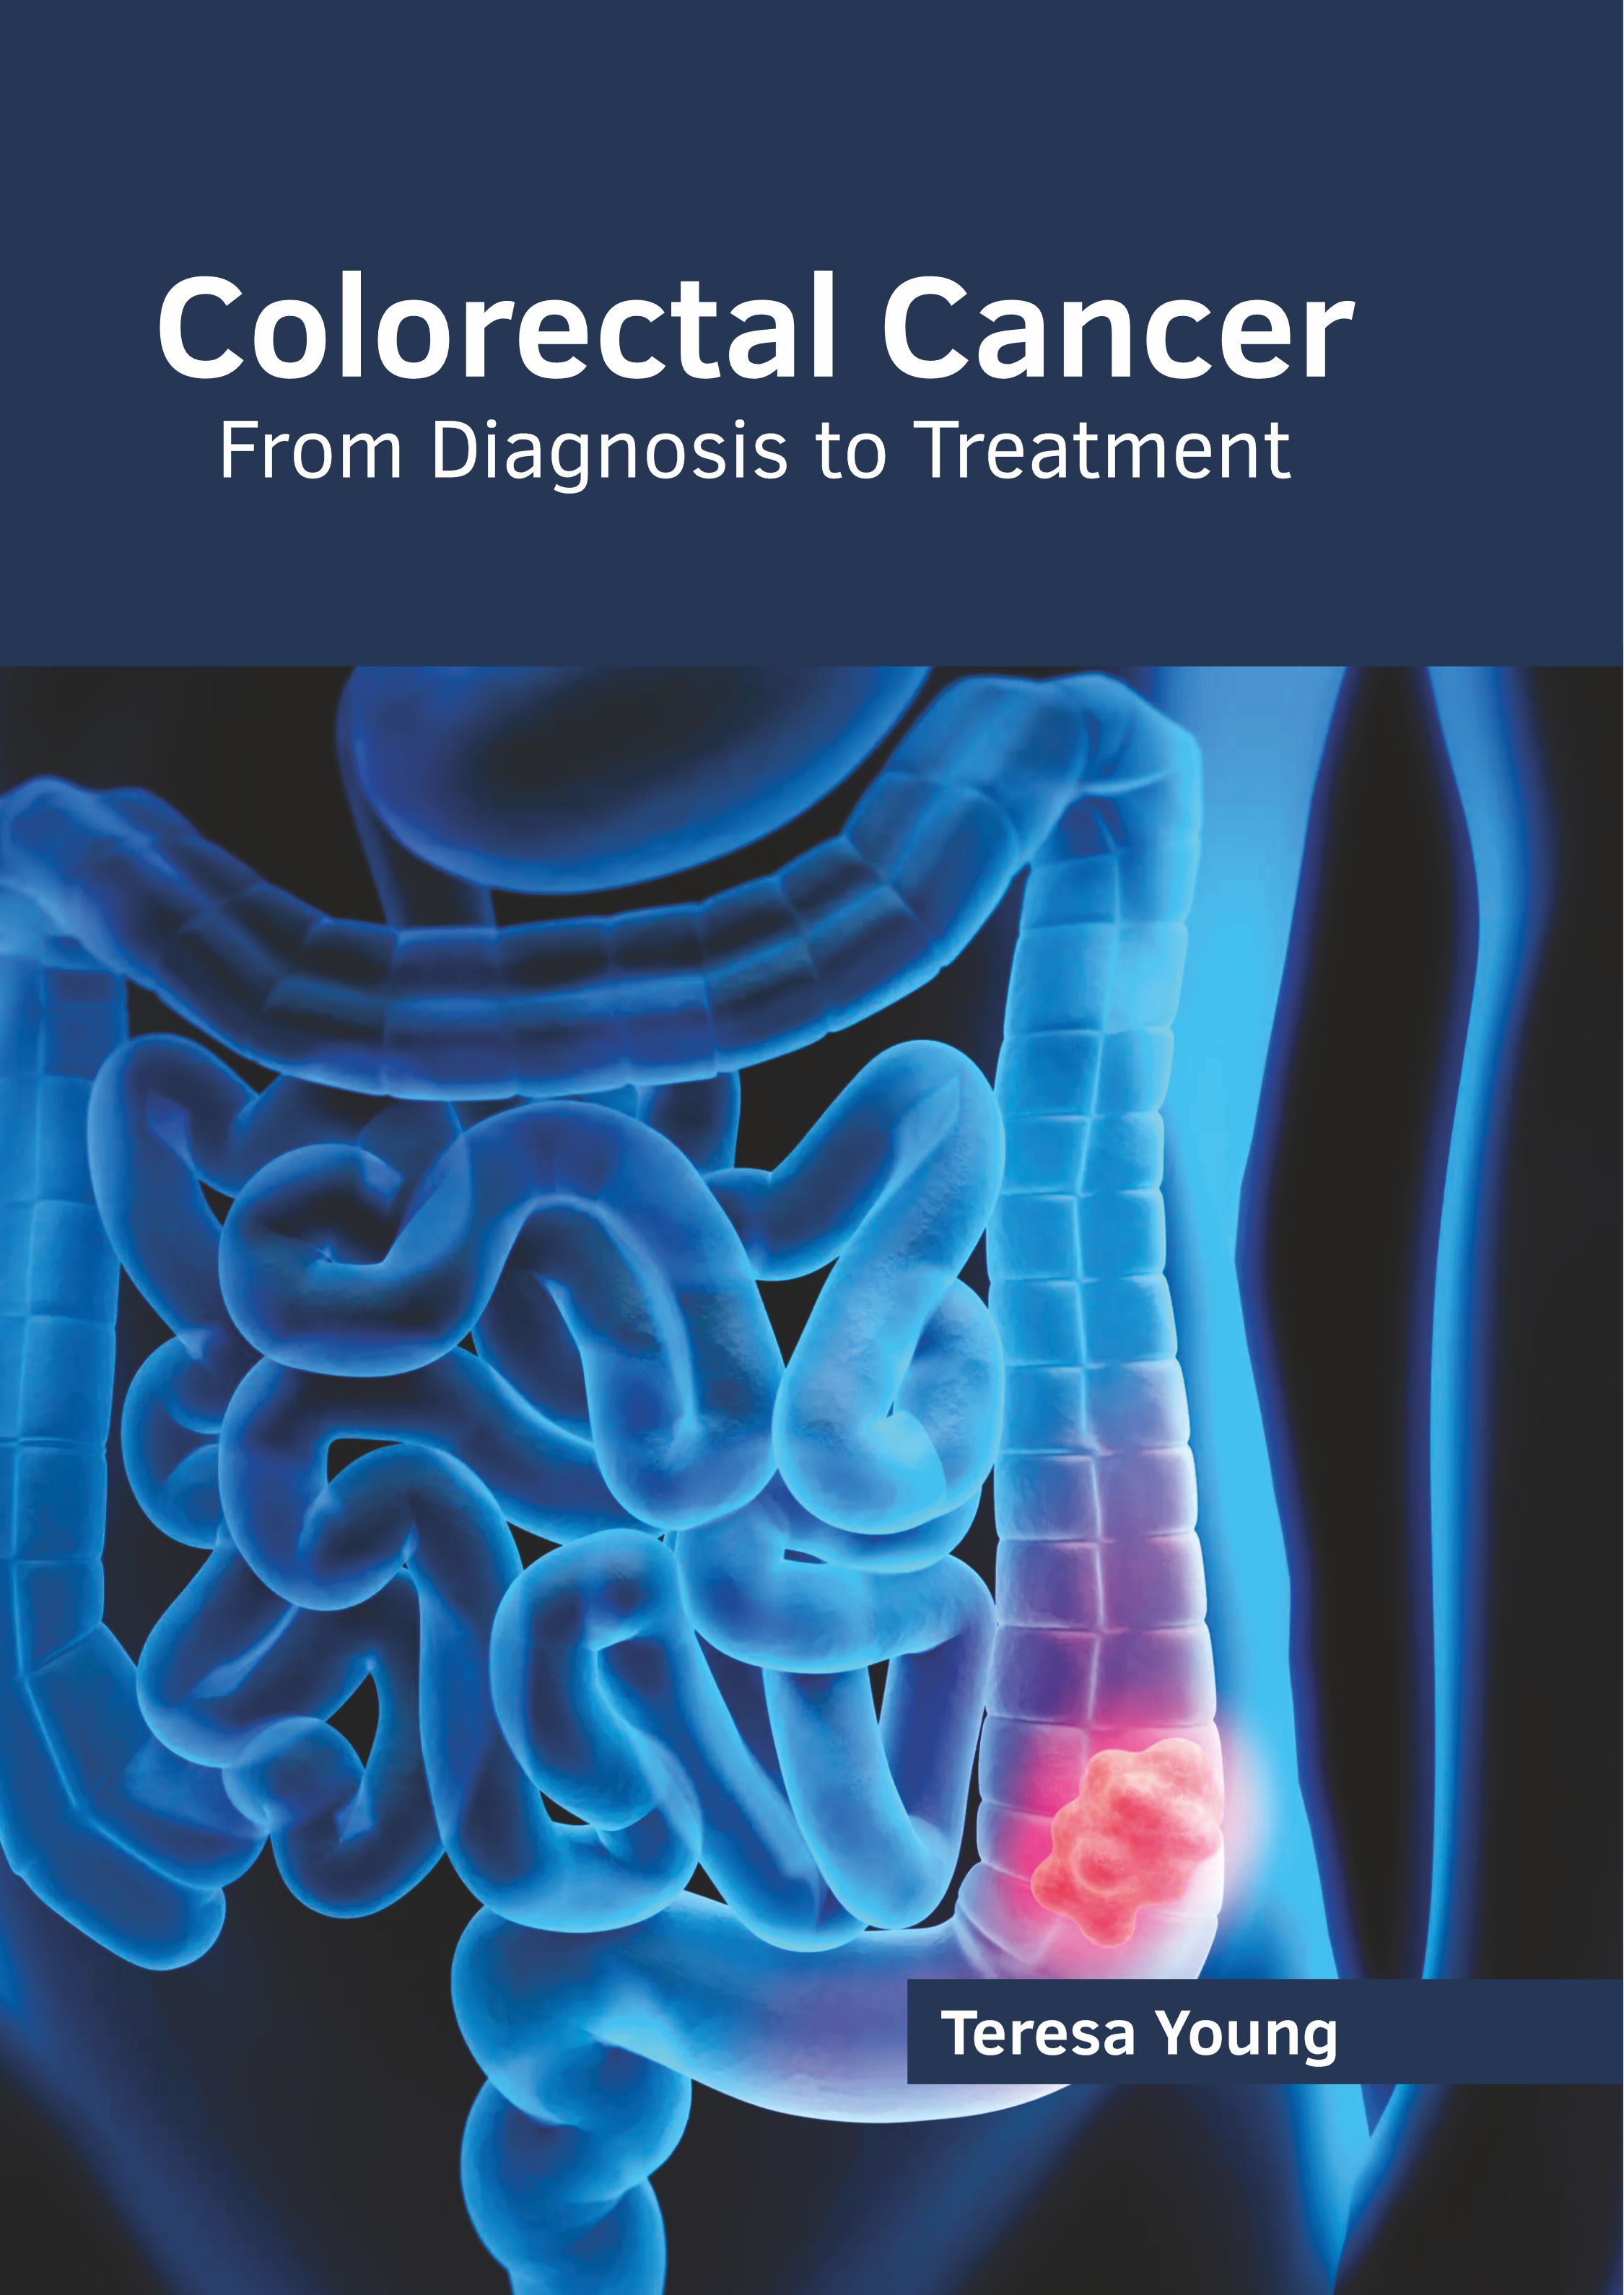 COLORECTAL CANCER: FROM DIAGNOSIS TO TREATMENT